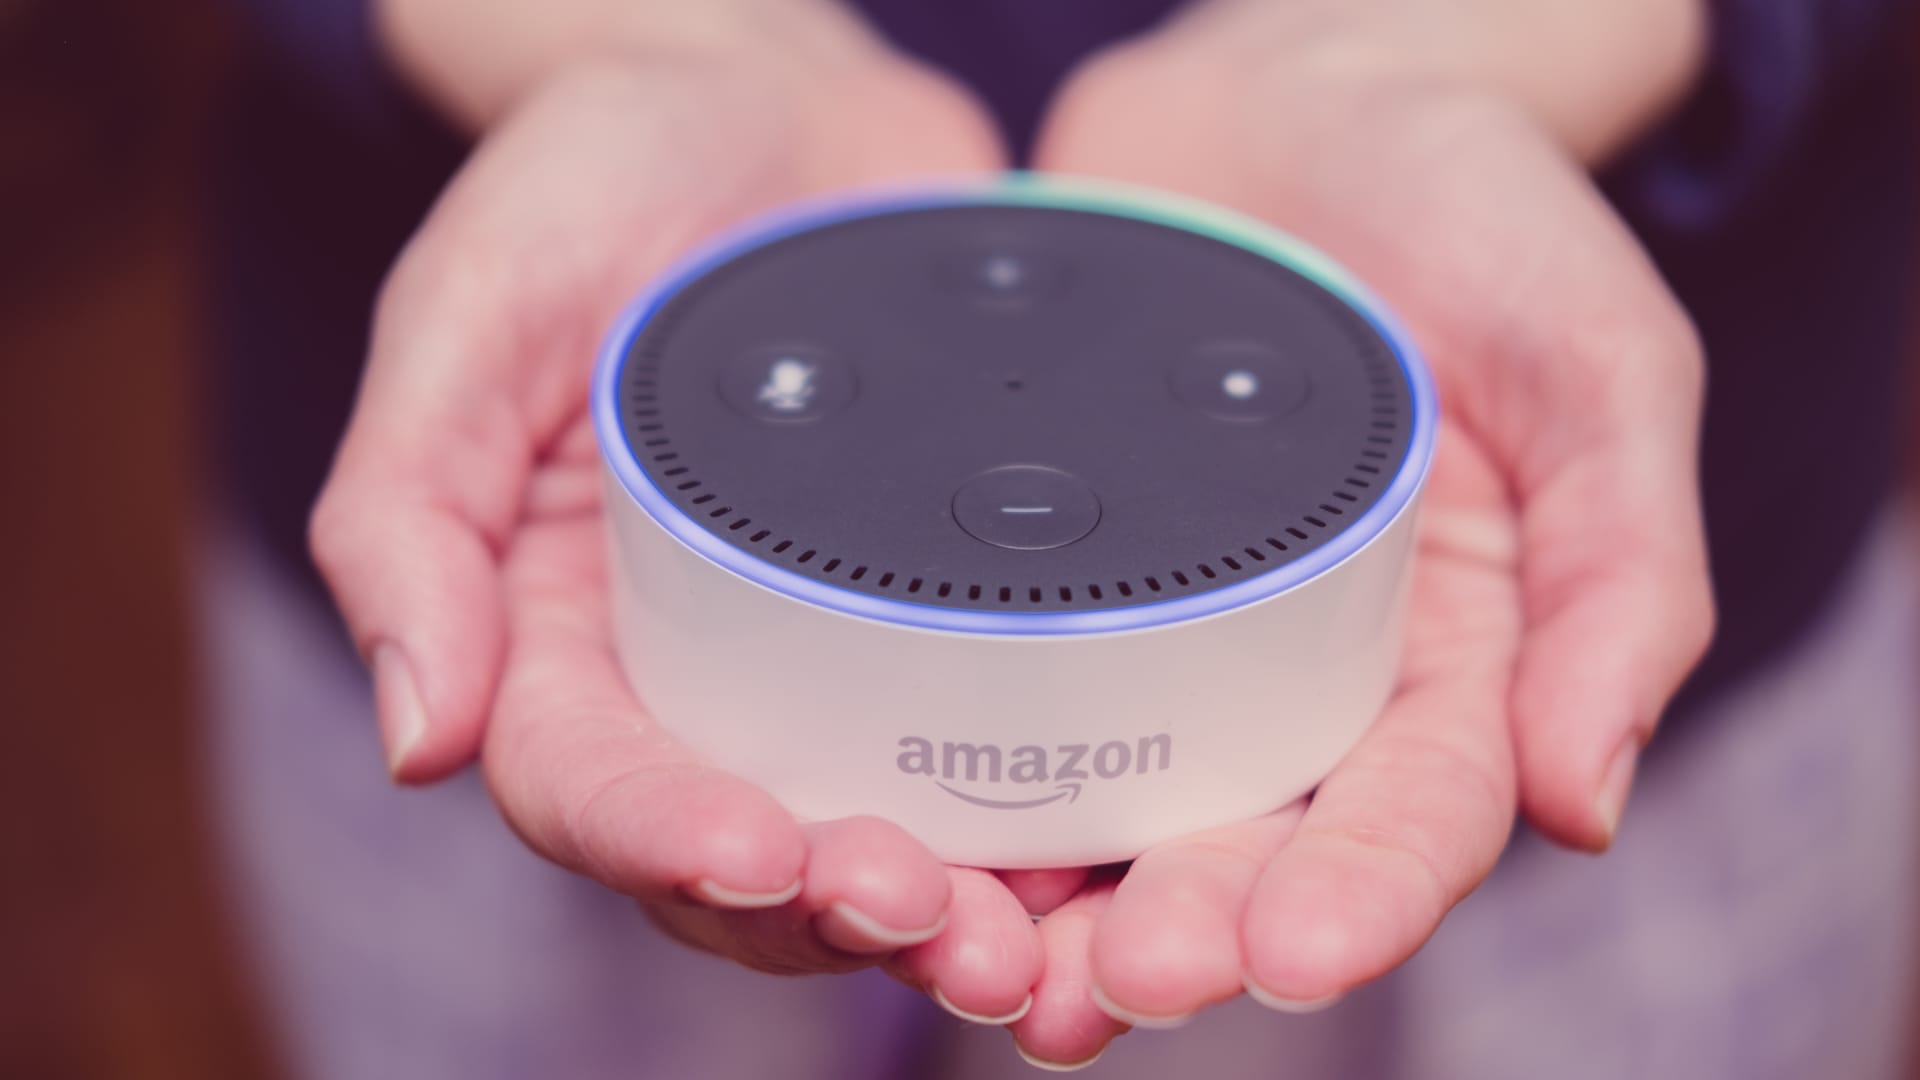 Amazon demonstrates Alexa mimicking the voice of a deceased relative